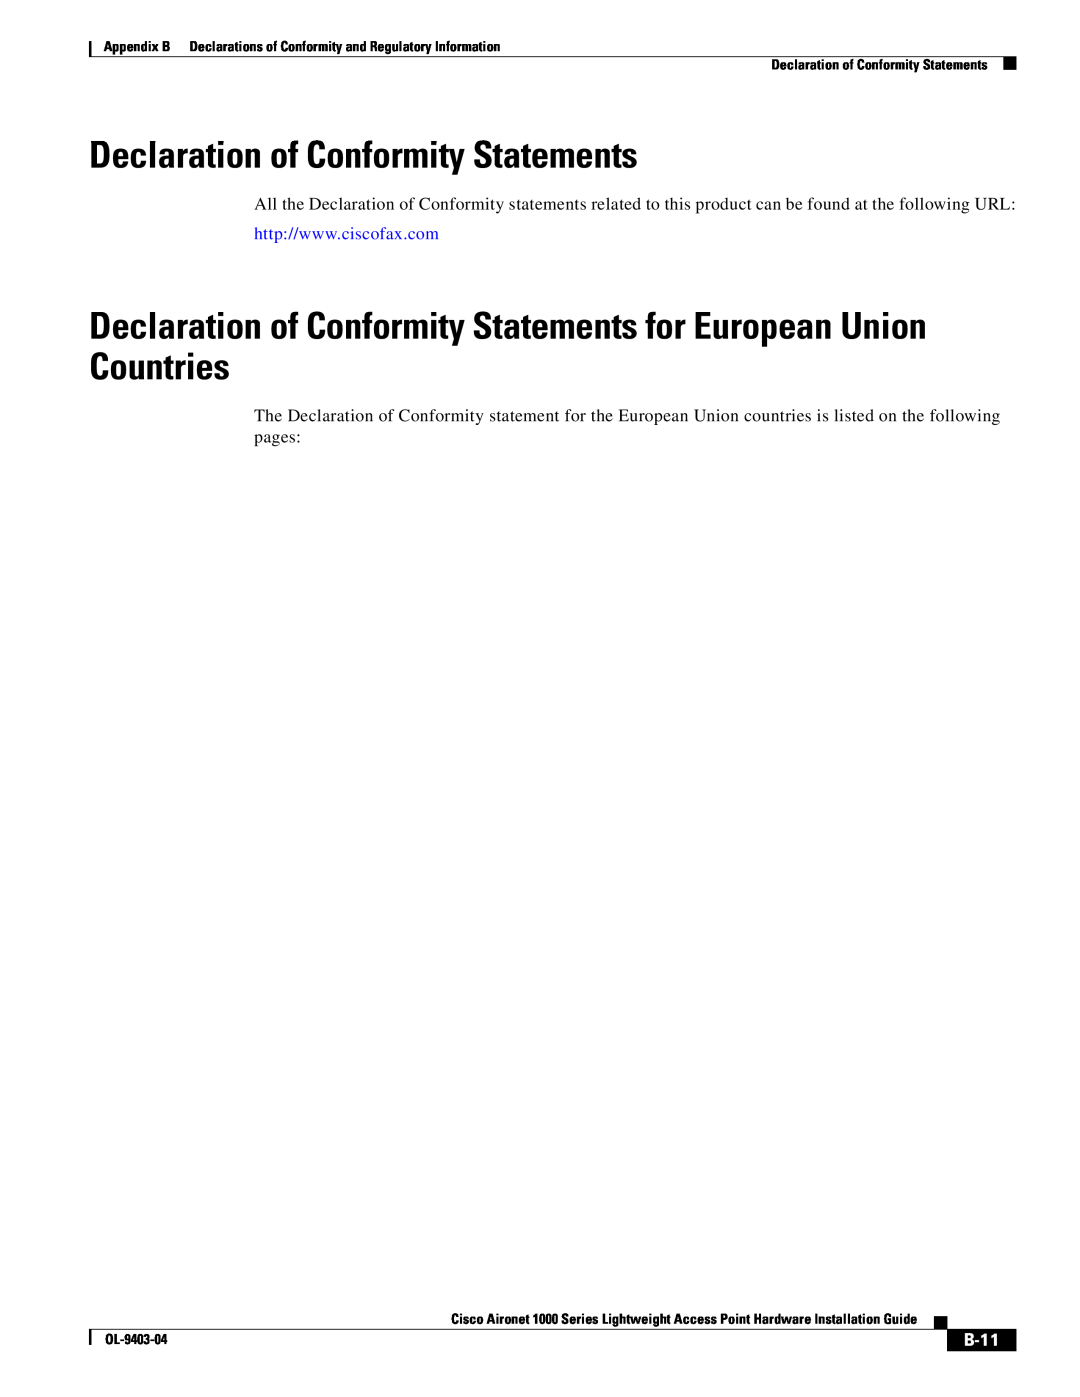 Cisco Systems 2000 appendix Declaration of Conformity Statements for European Union Countries, B-11 